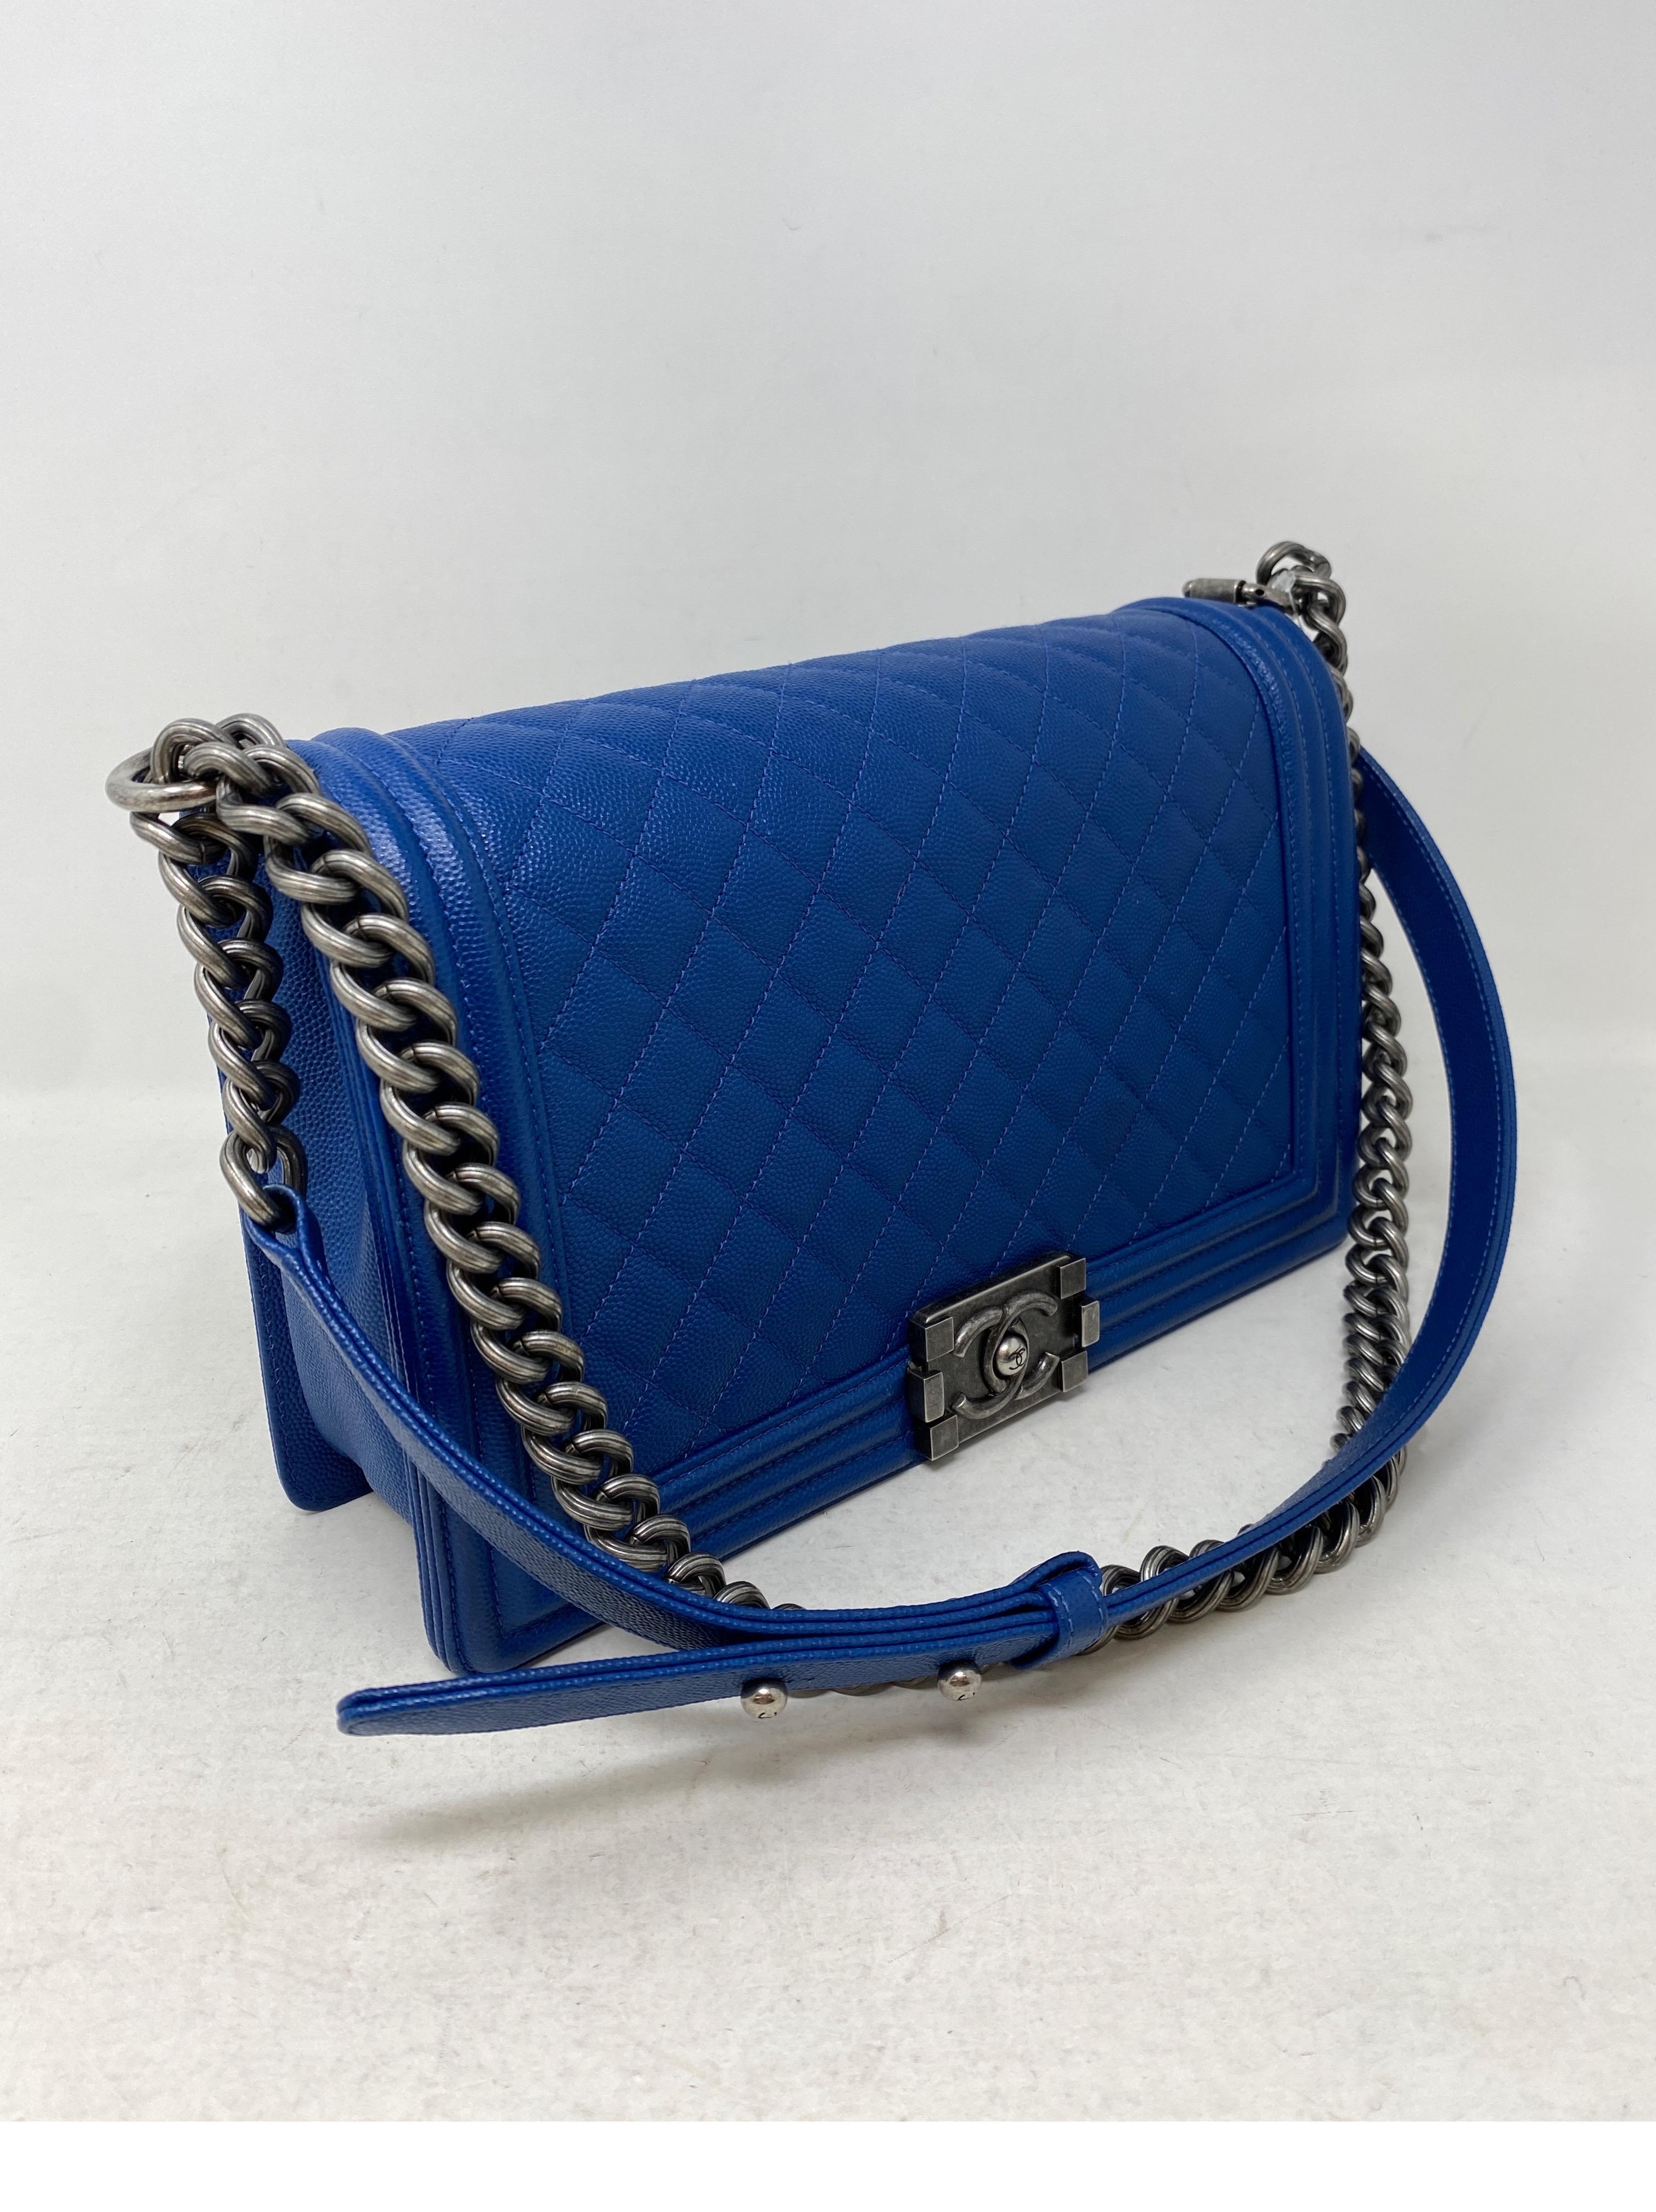 Chanel Blue Boy Bag. Gorgeous caviar blue leather. Ruthenium hardware. Mint like new condition. Rare color blue Boy bag. Can be worn as a crossbody or doubled as a shoulder bag. Guaranteed authentic. 